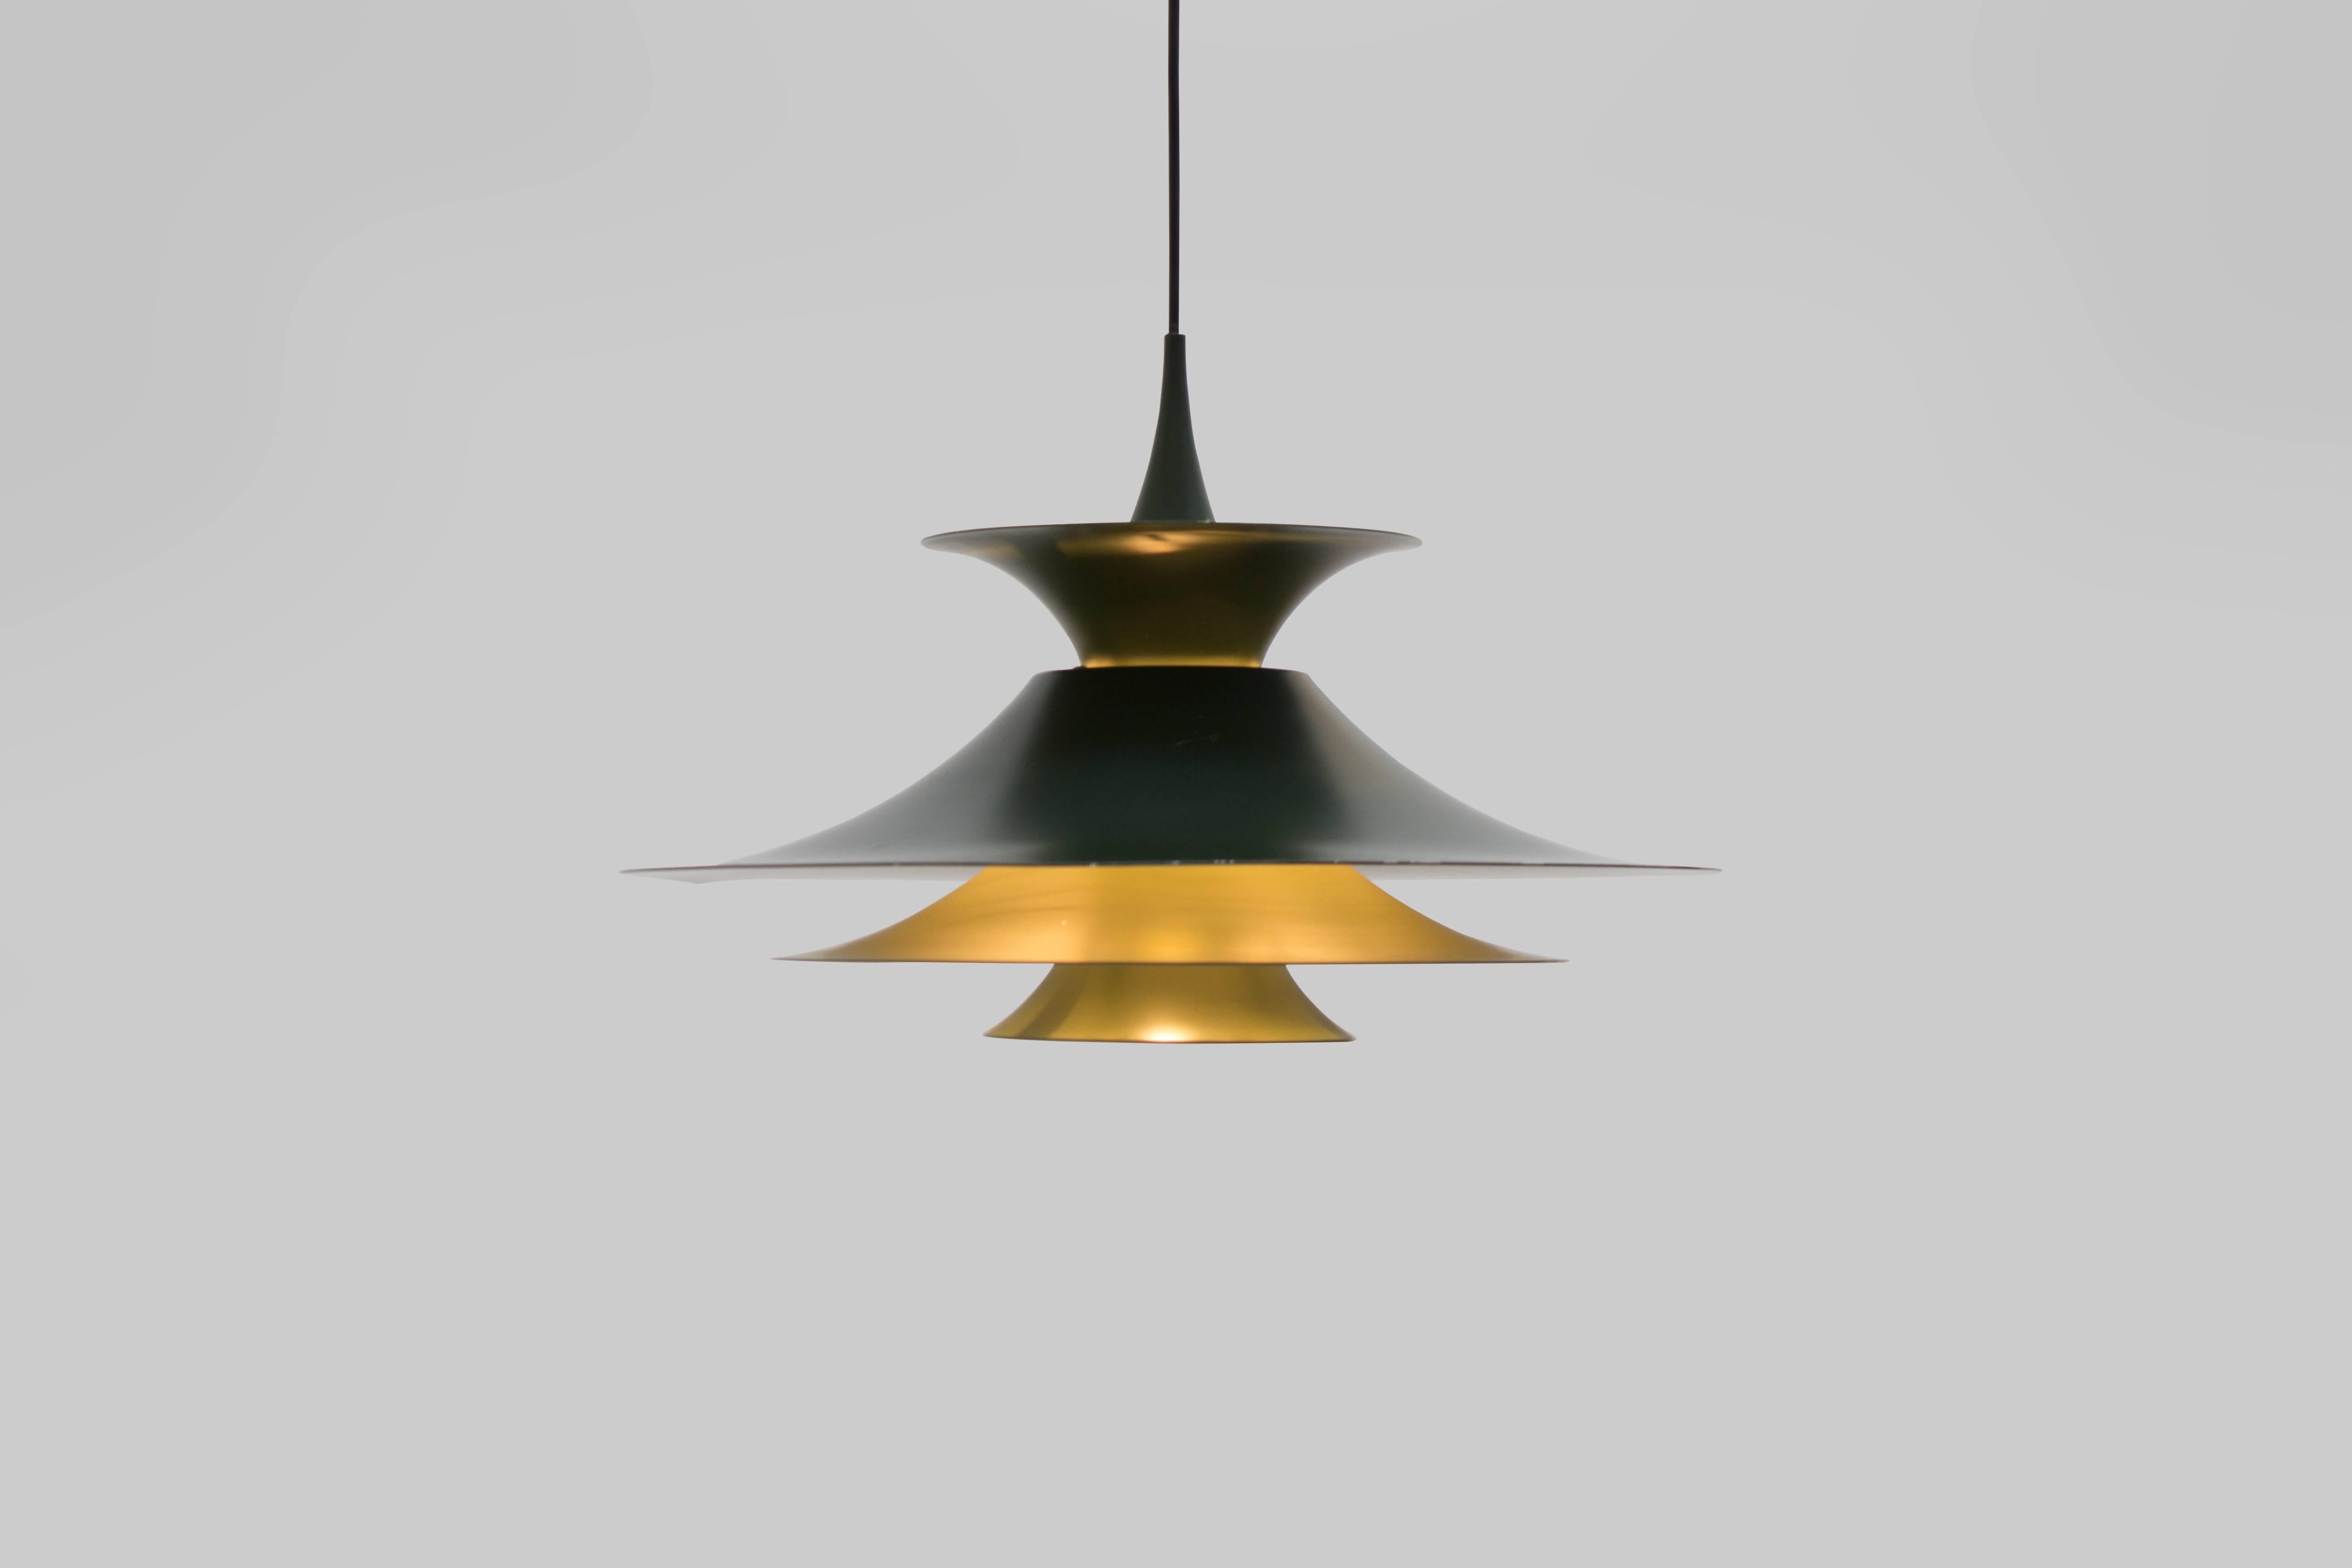 'Radius' pendant lamp by Eric Balslev for Fog & Mørup in Denmark, circa 1970. Made of enameled aluminum. Painted in ivory and dark green.

In good condition.